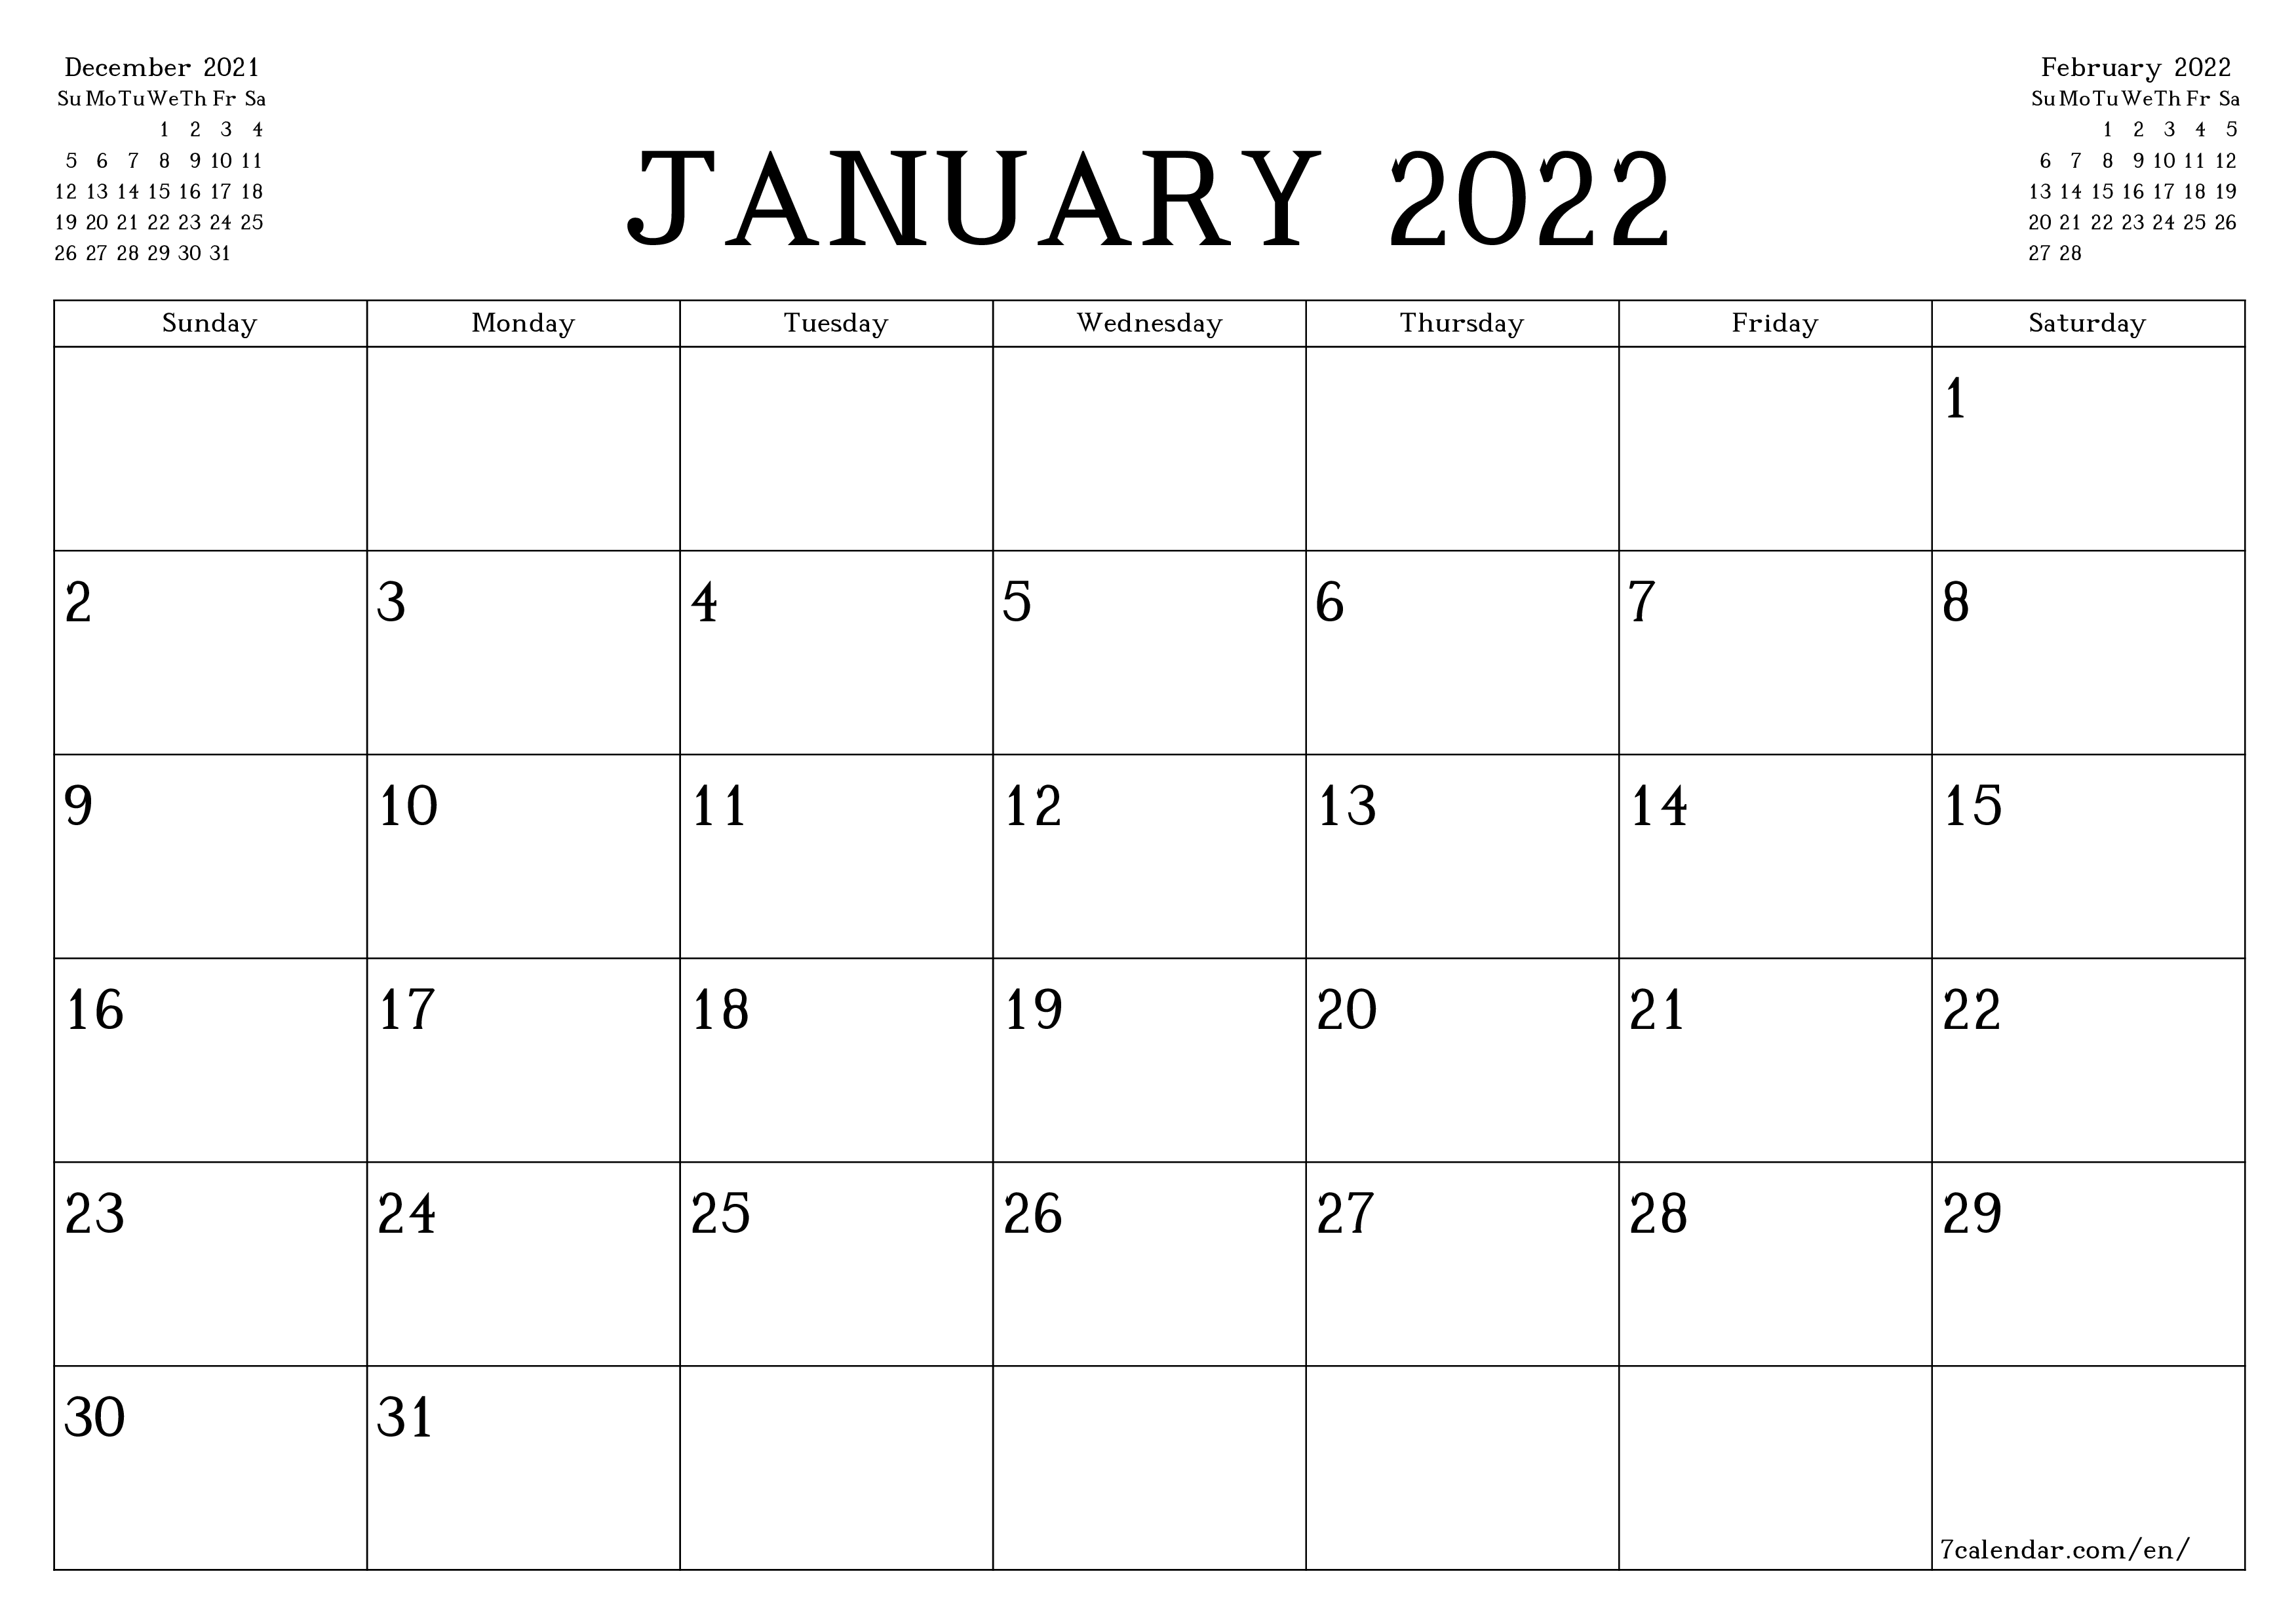 Blank monthly printable calendar and planner for month January 2022 with notes save and print to PDF PNG English - 7calendar.com